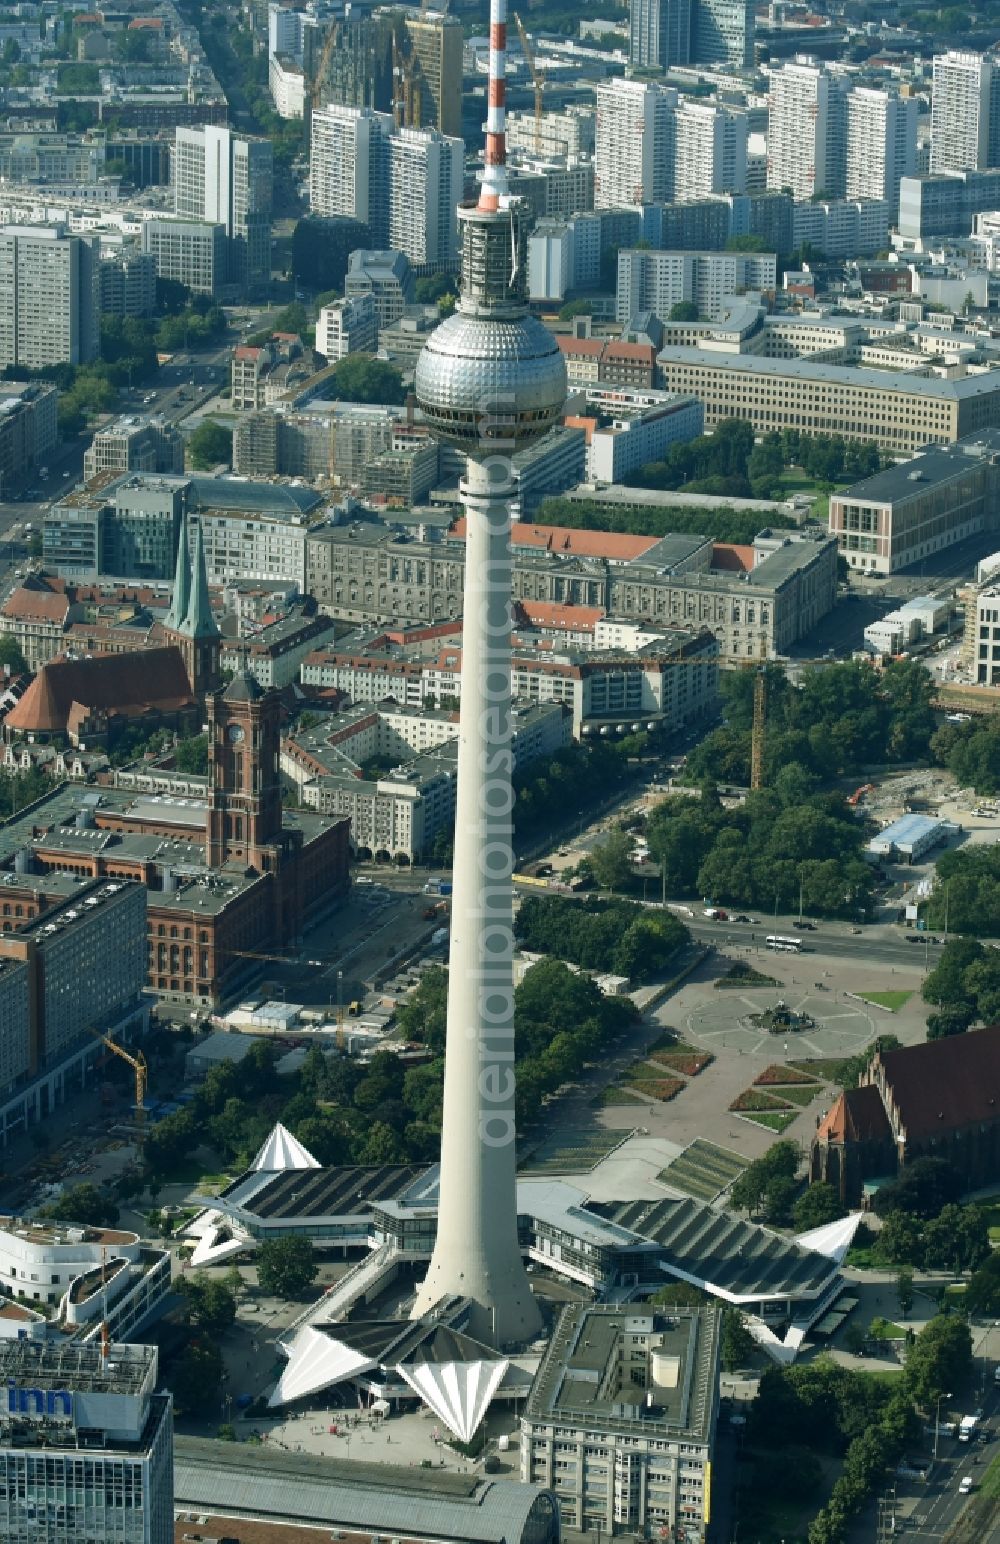 Berlin from the bird's eye view: The city center city east on tv - Tower in the downtown are in Berlin in Germany